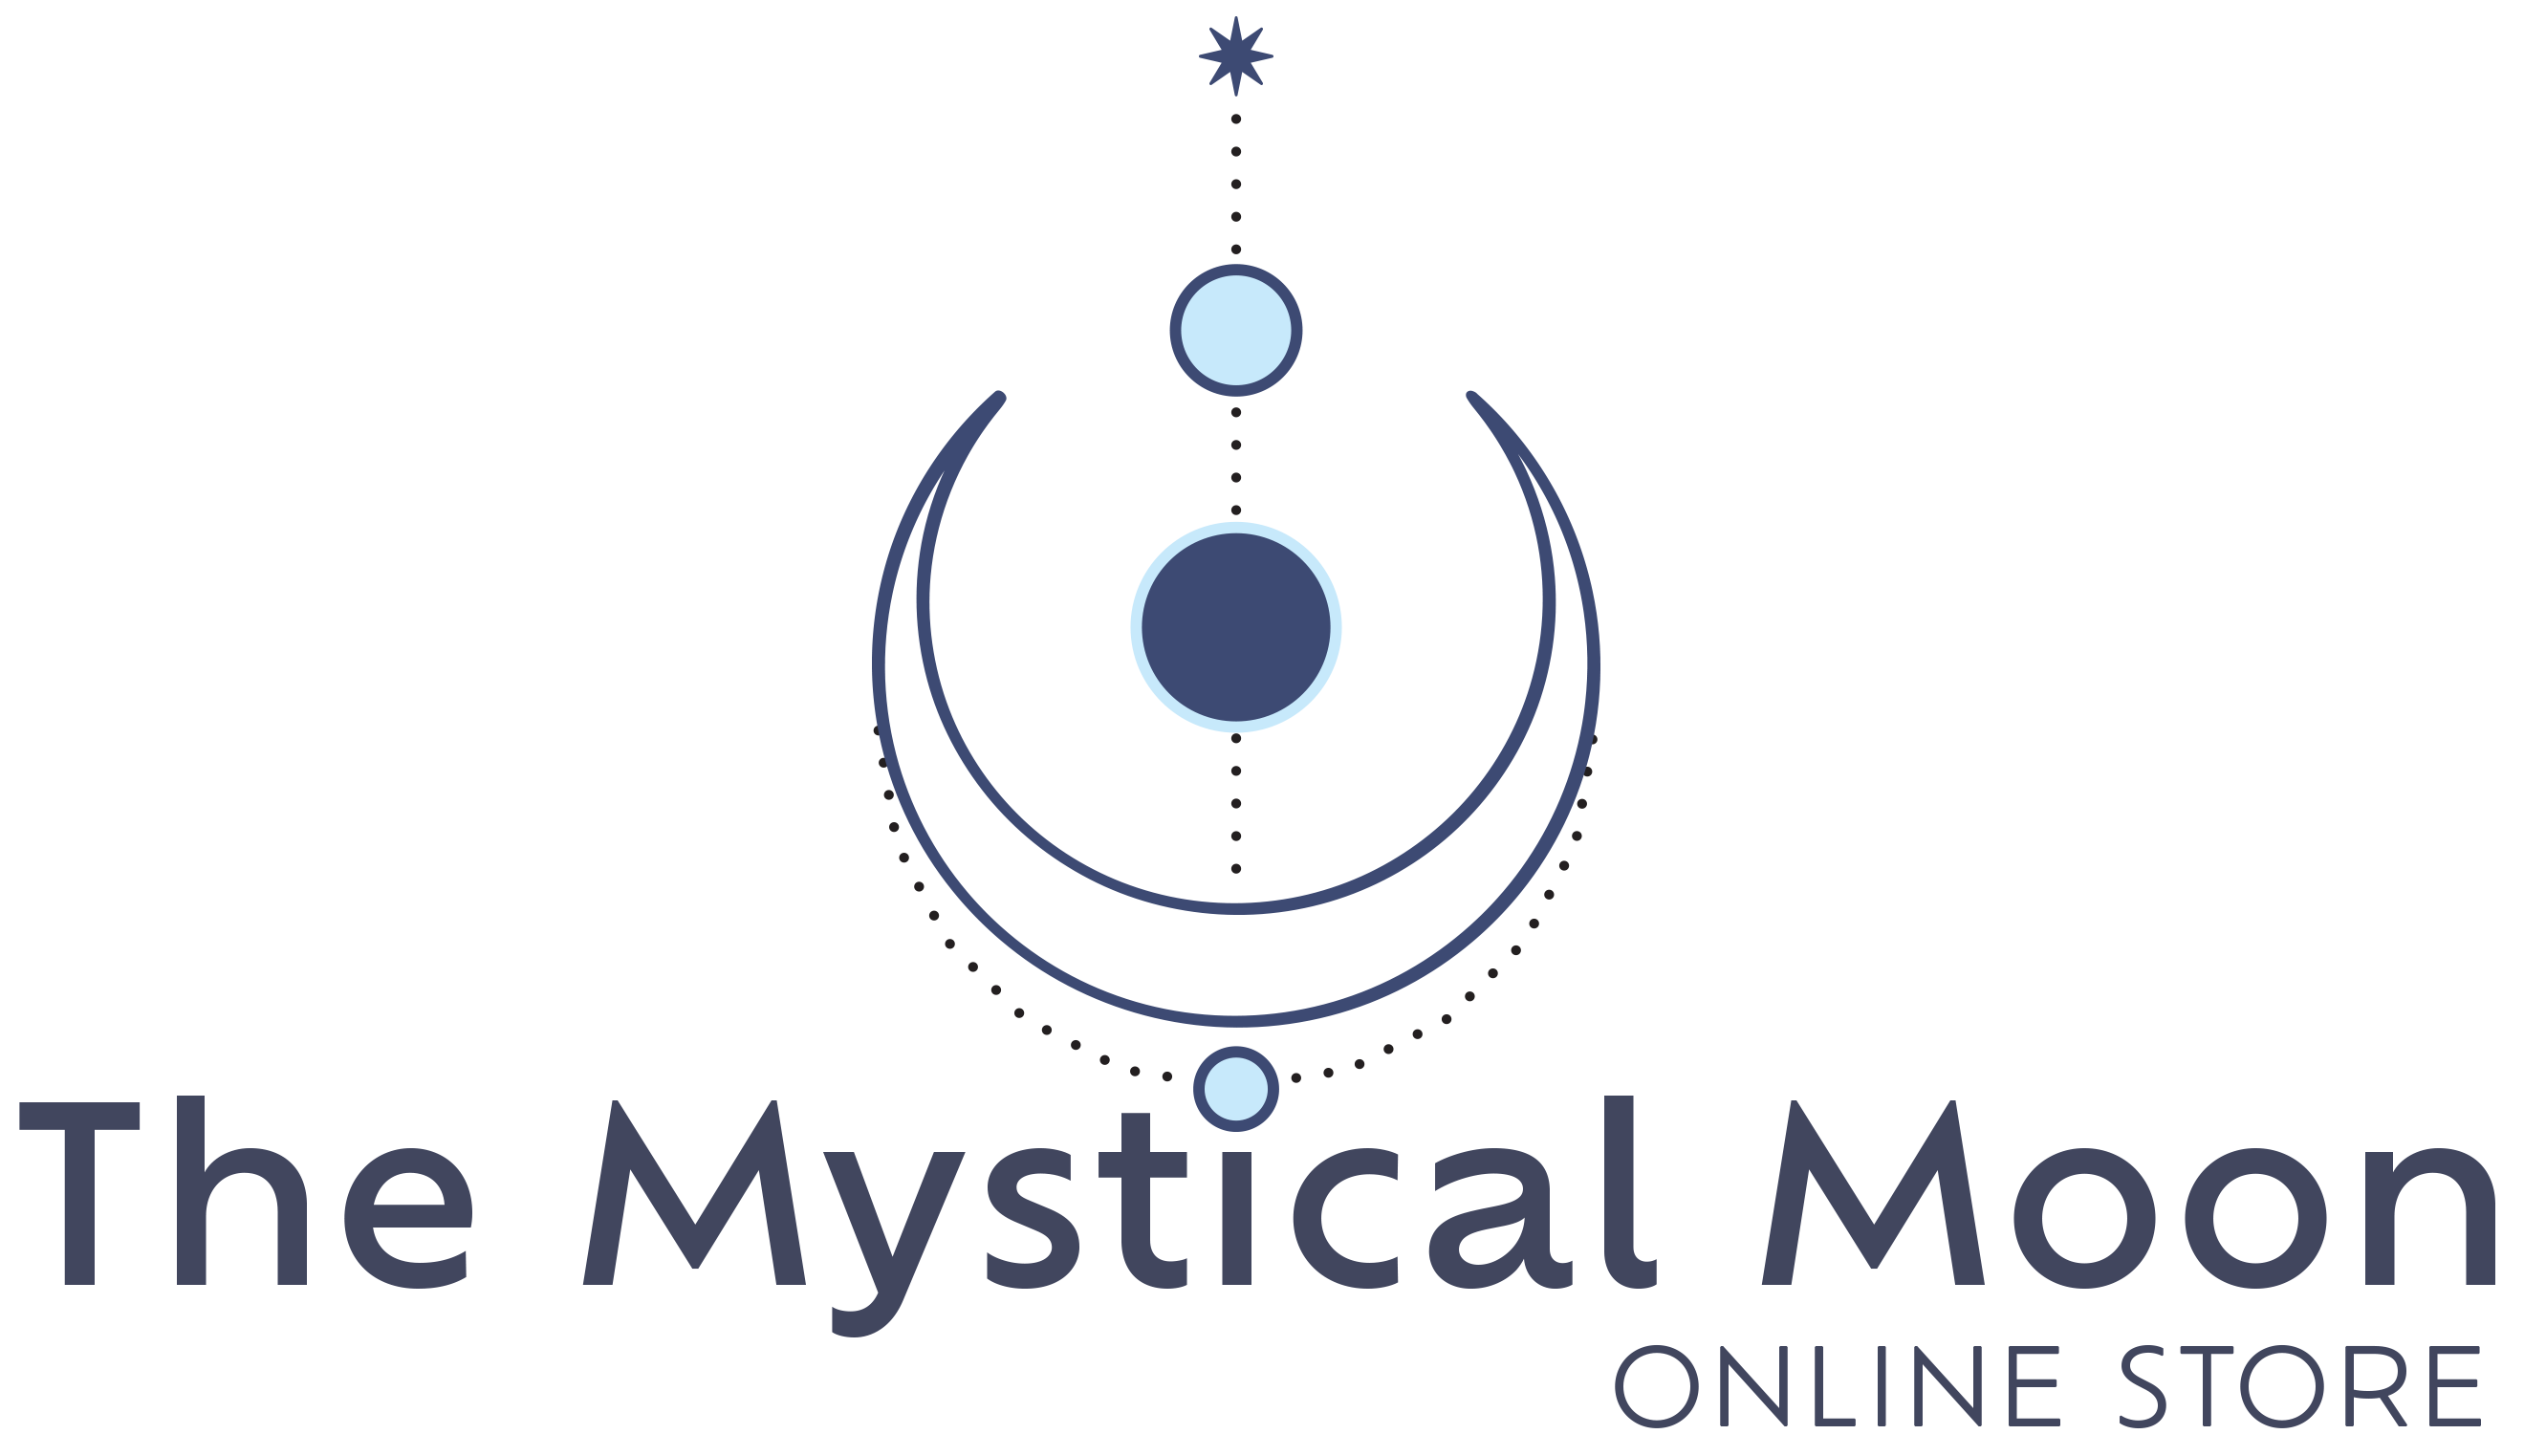 The Mystical Moon Online Store